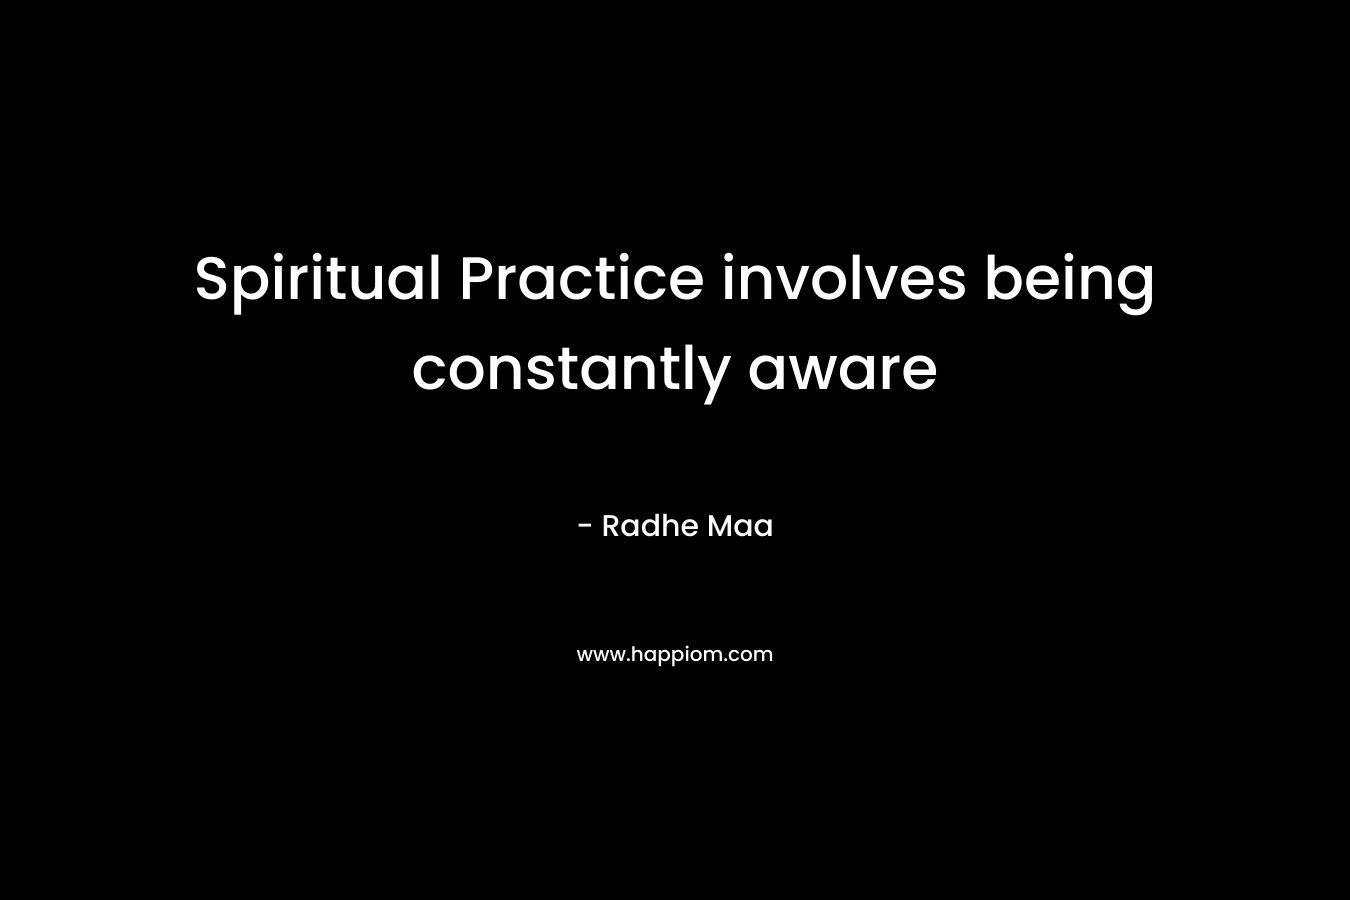 Spiritual Practice involves being constantly aware